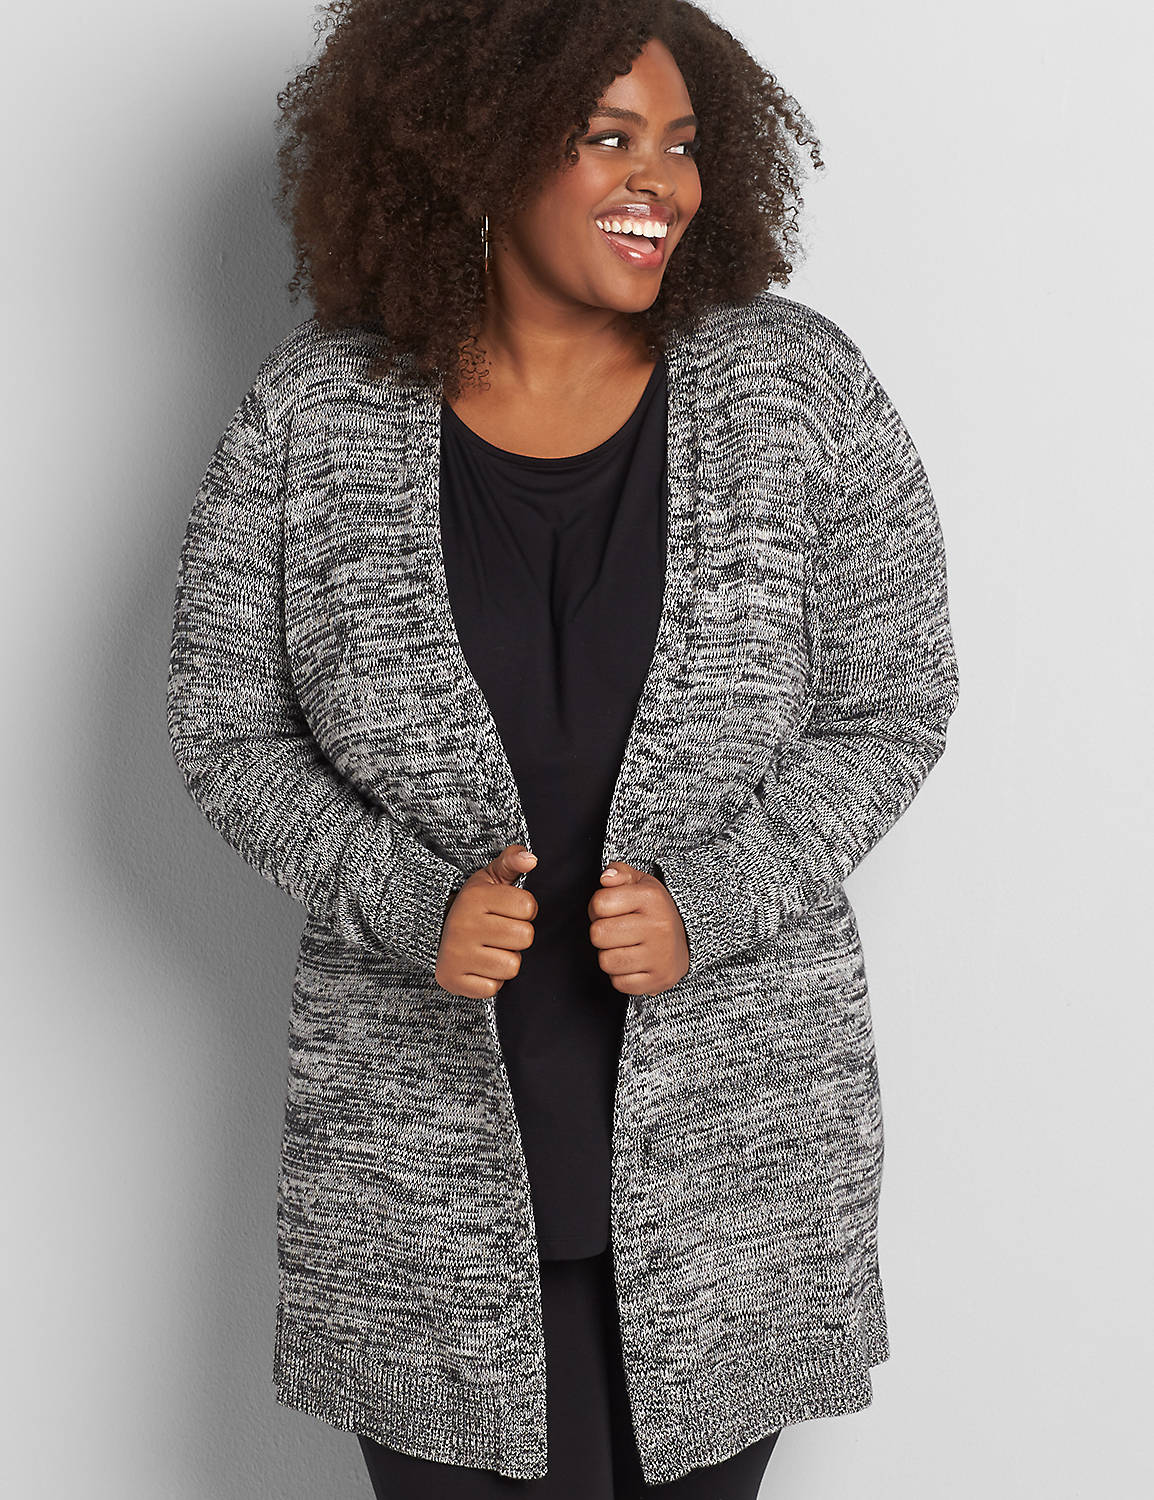 Long Sleeve Clean Front Cardigan with Marl 1118445:Ascena Black:26/28 Product Image 1